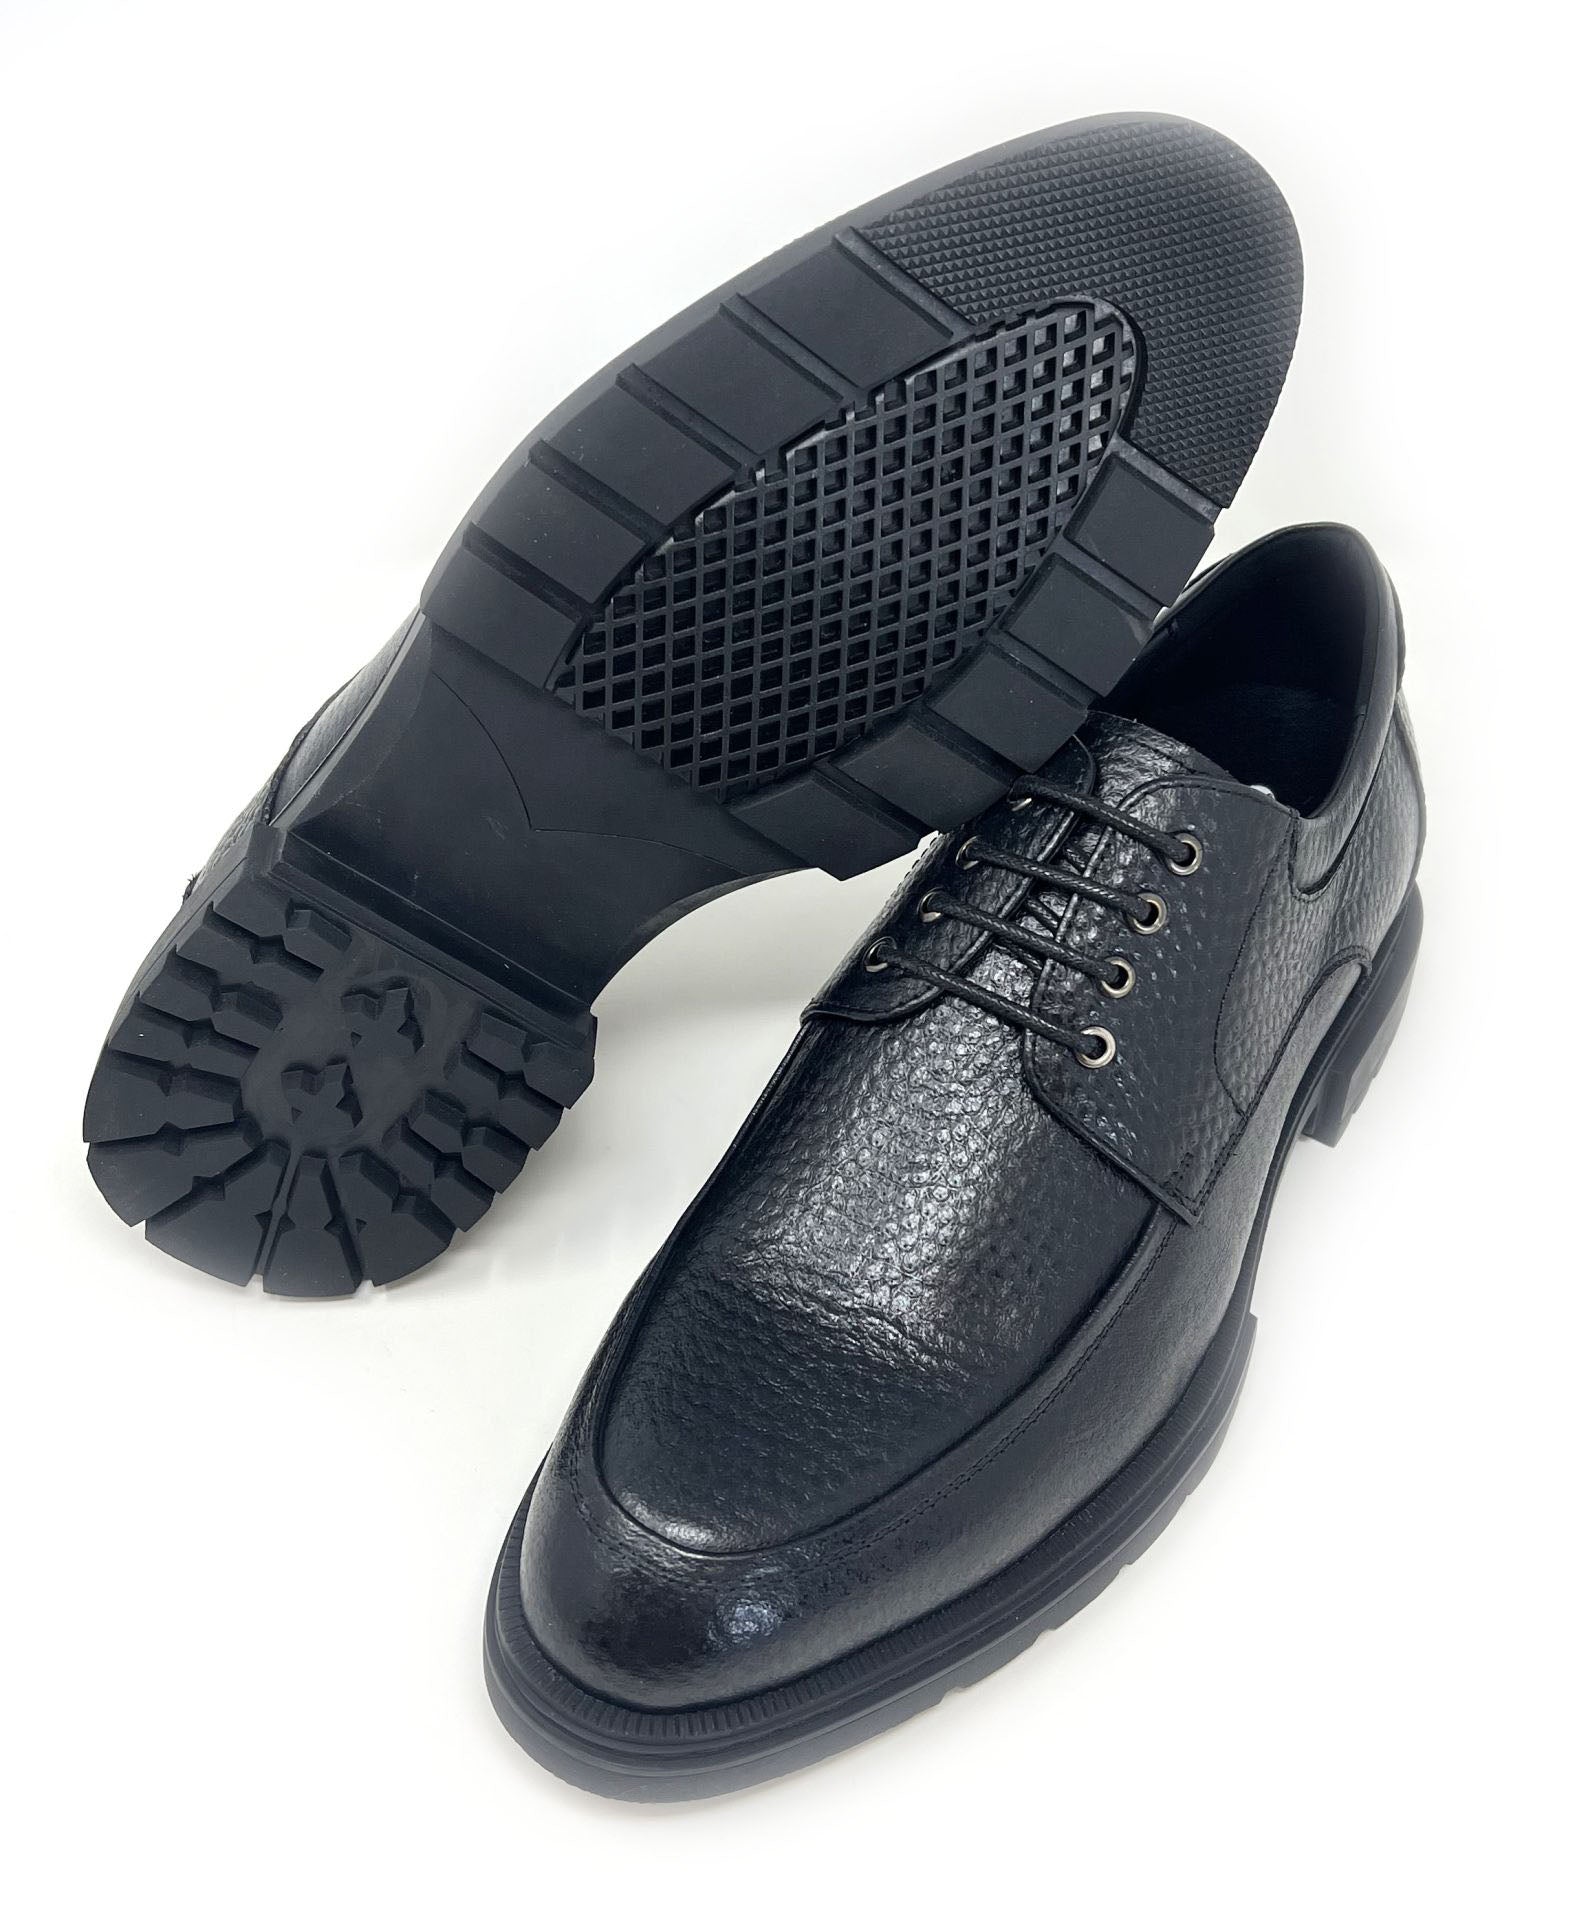 Elevator shoes height increase FSH0041 - 2.6 Inches Taller (Black) - Size 7.5 Only